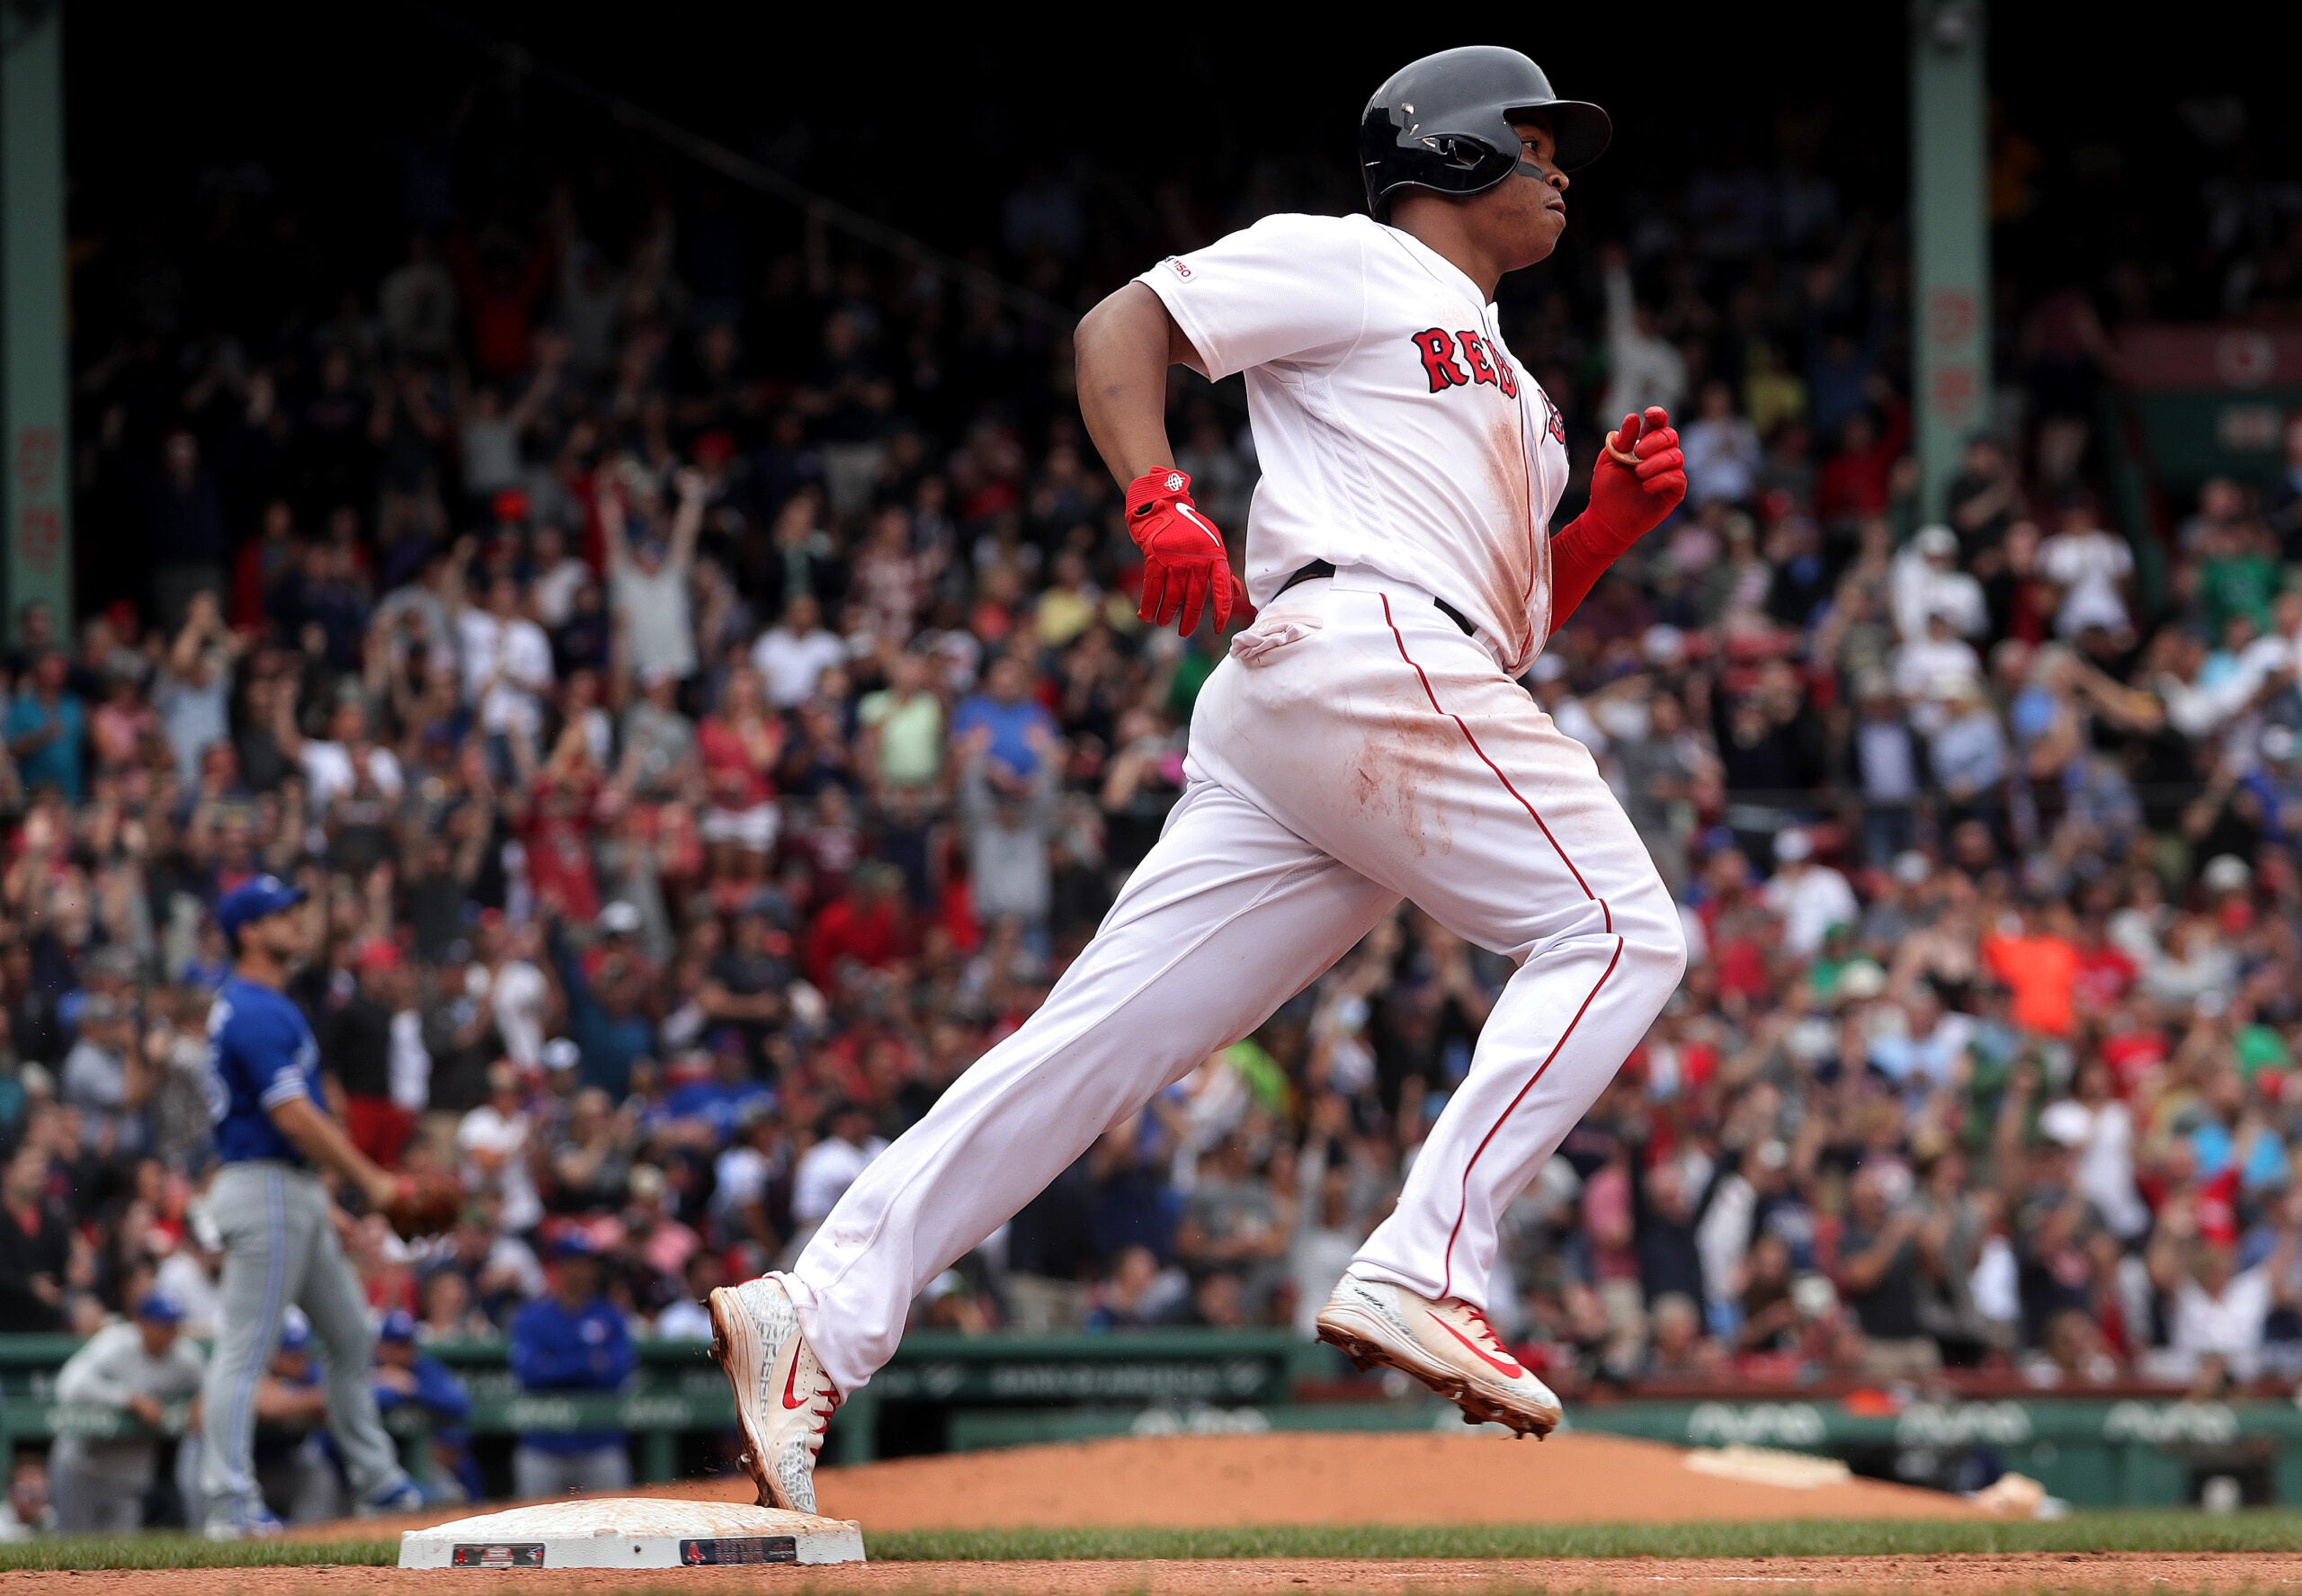 Rafael Devers staying red hot at top of the order